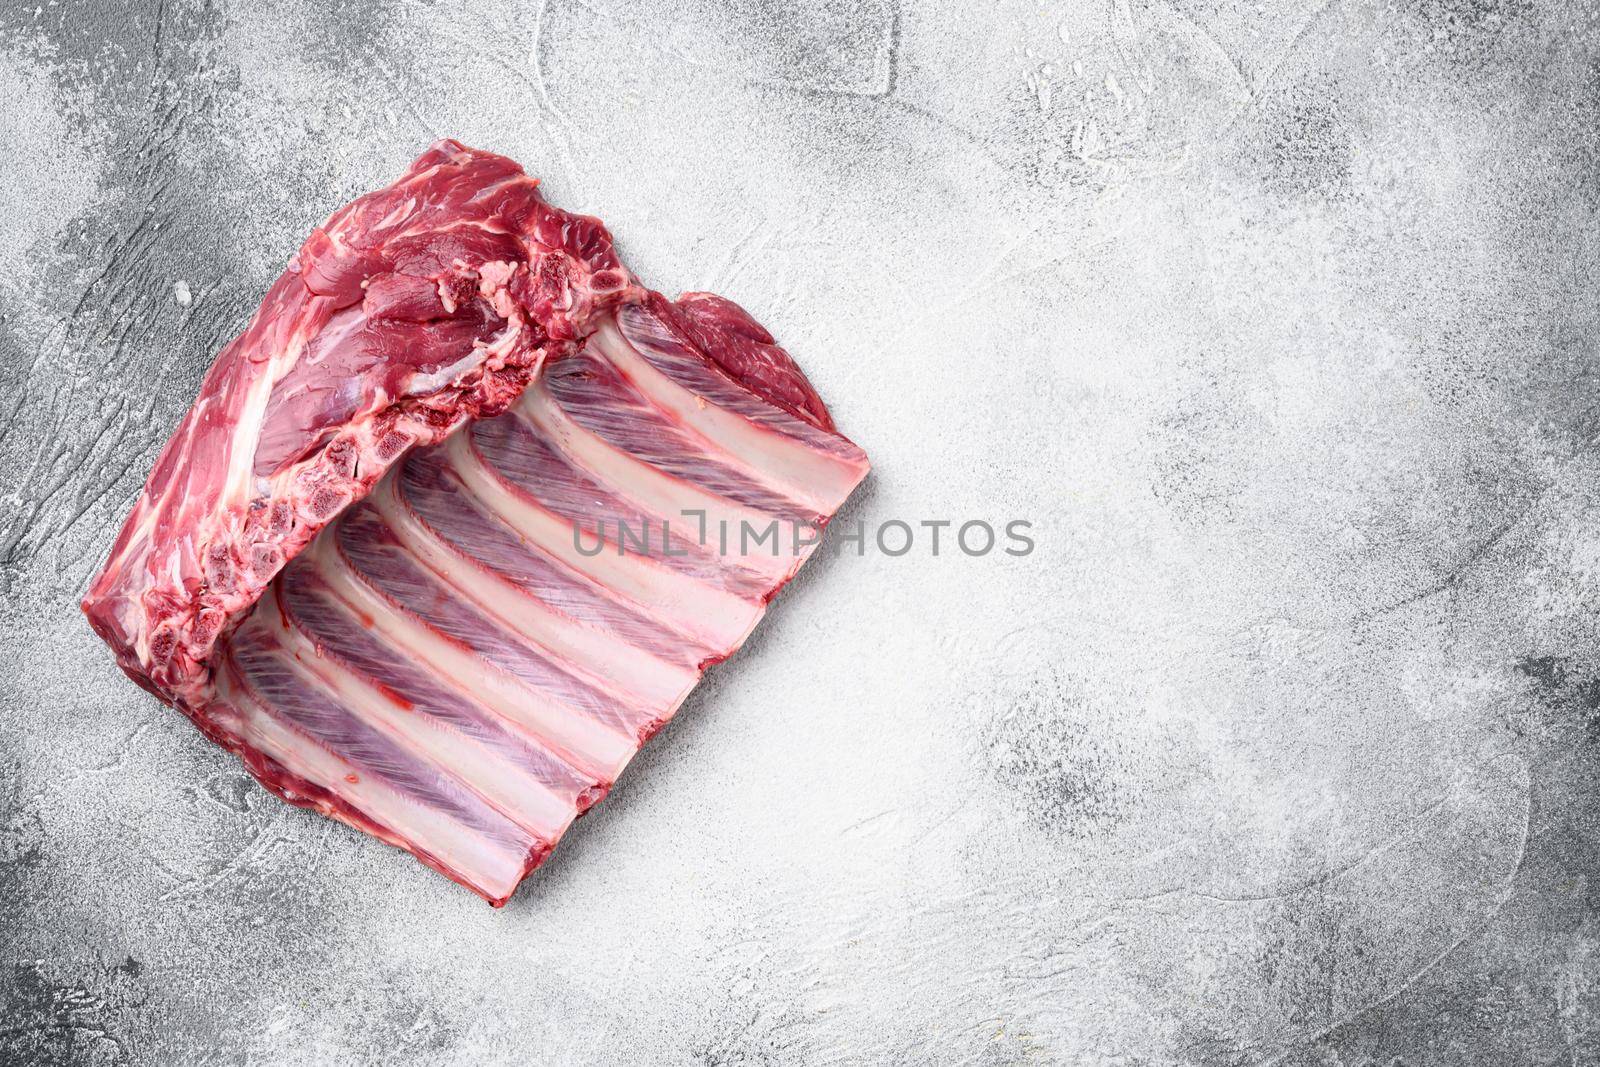 Lamb ribs cooking. Raw rack of lamb meat, on gray stone table background, top view flat lay, with copy space for text by Ilianesolenyi